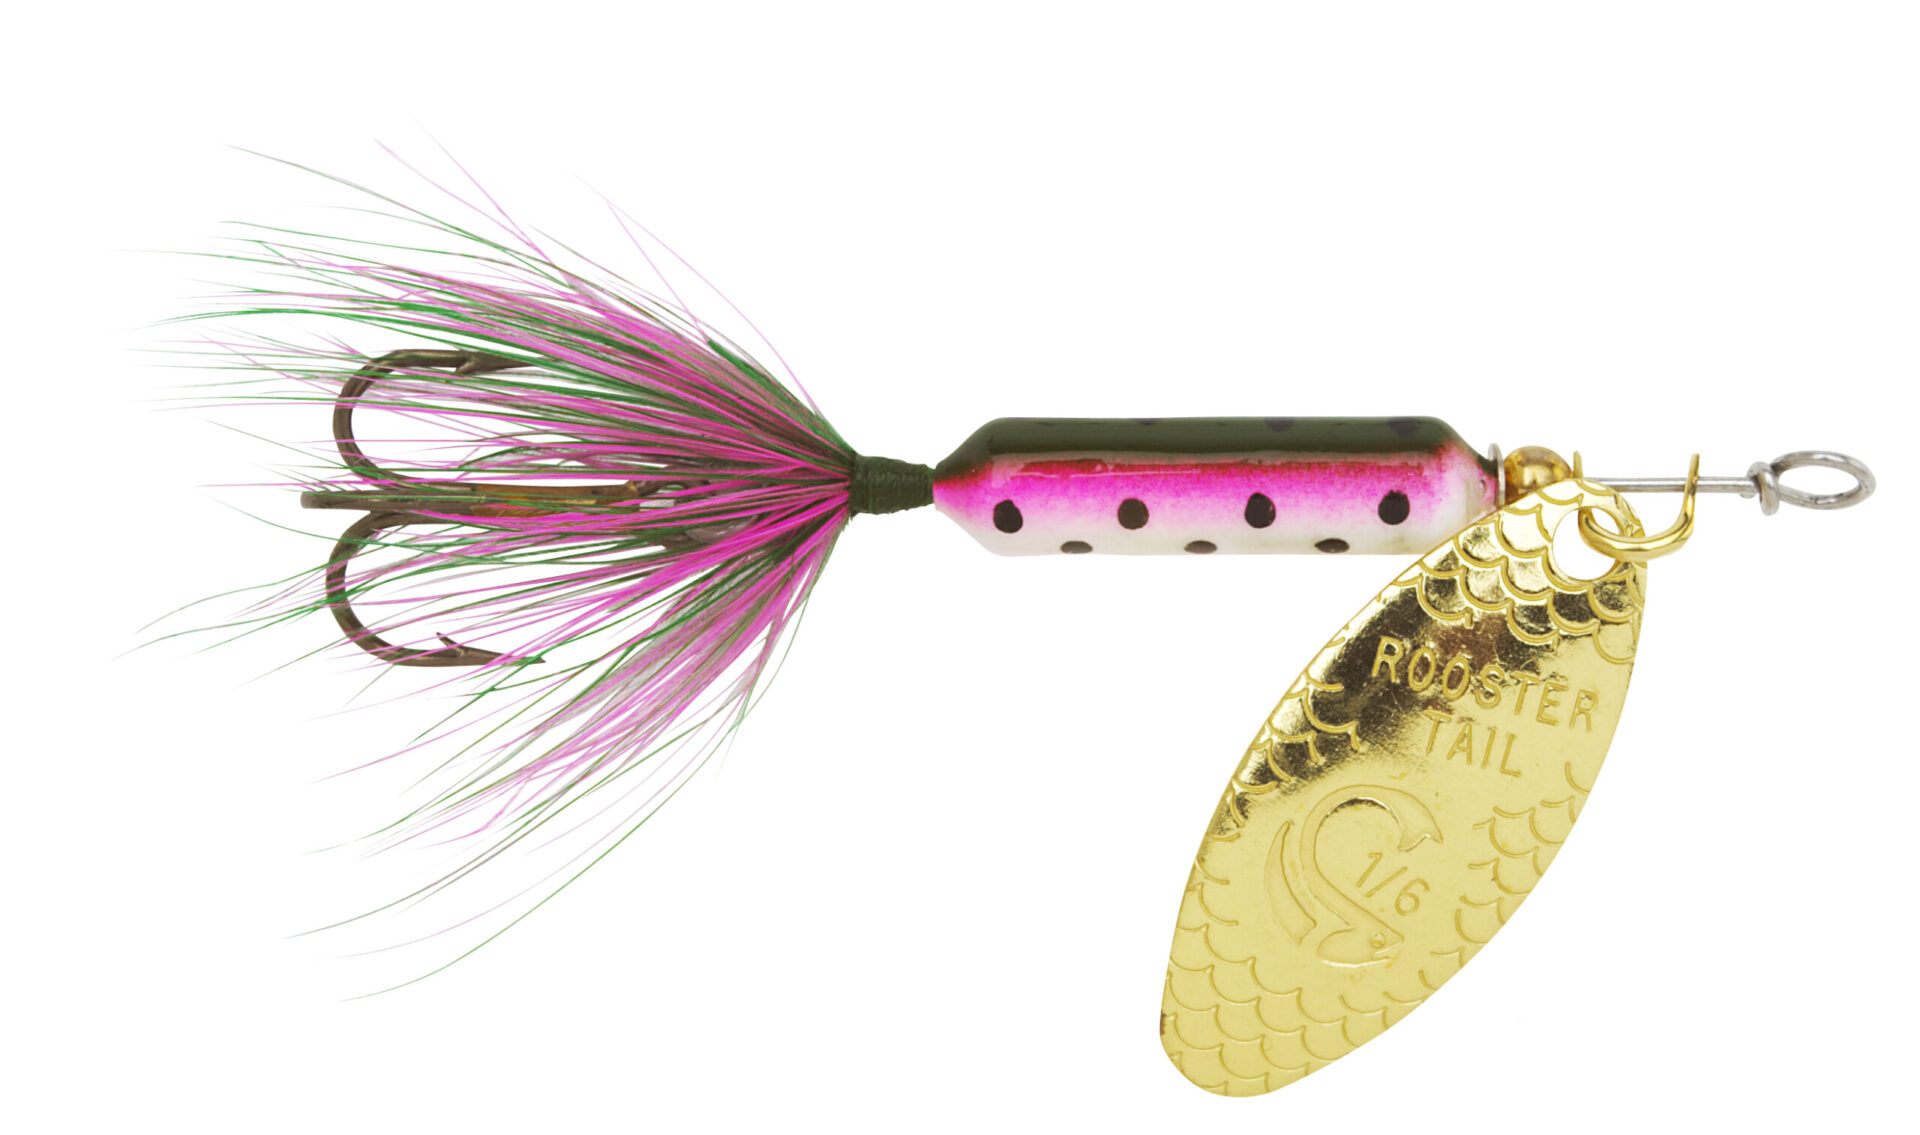 Worden's Rooster Tail Trout Pak II